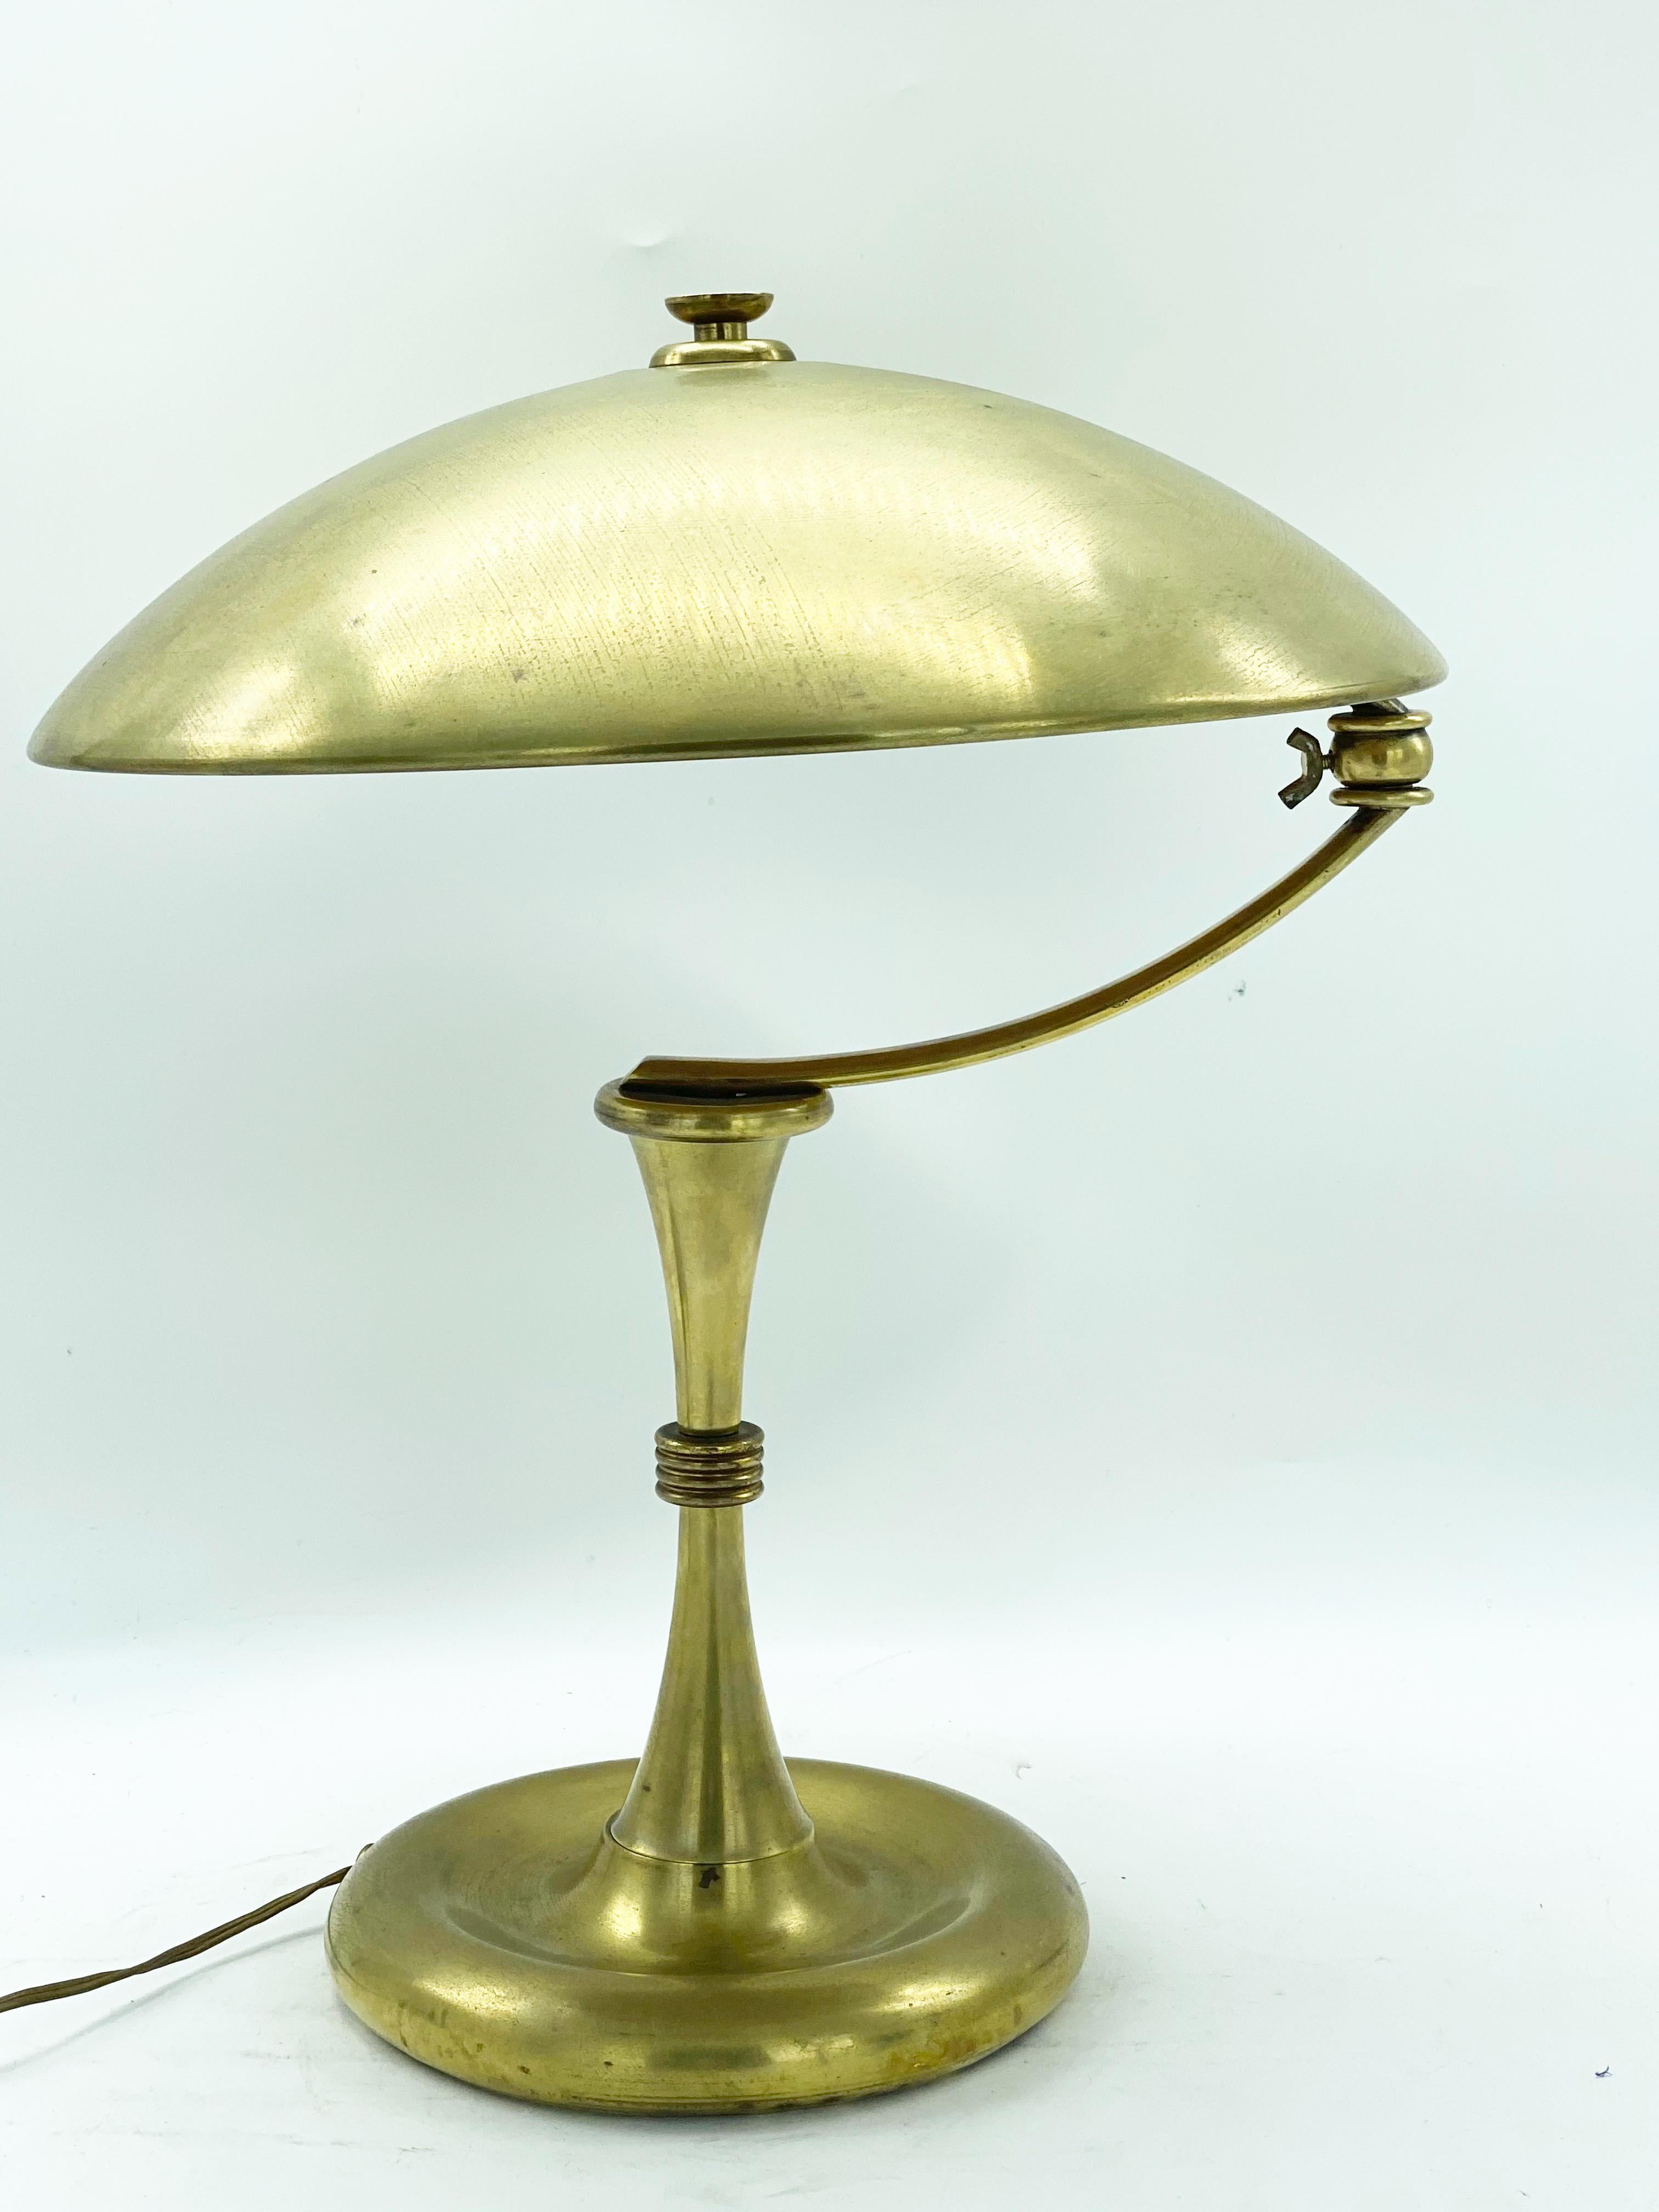 A classic desk lamp with Art Deco detail and rounded shade which swivels over the weighty base.
The brass features a characterful dark patina throughout adding warmth to any room.
Design Angelo Lelli for Arredoluce attributed.